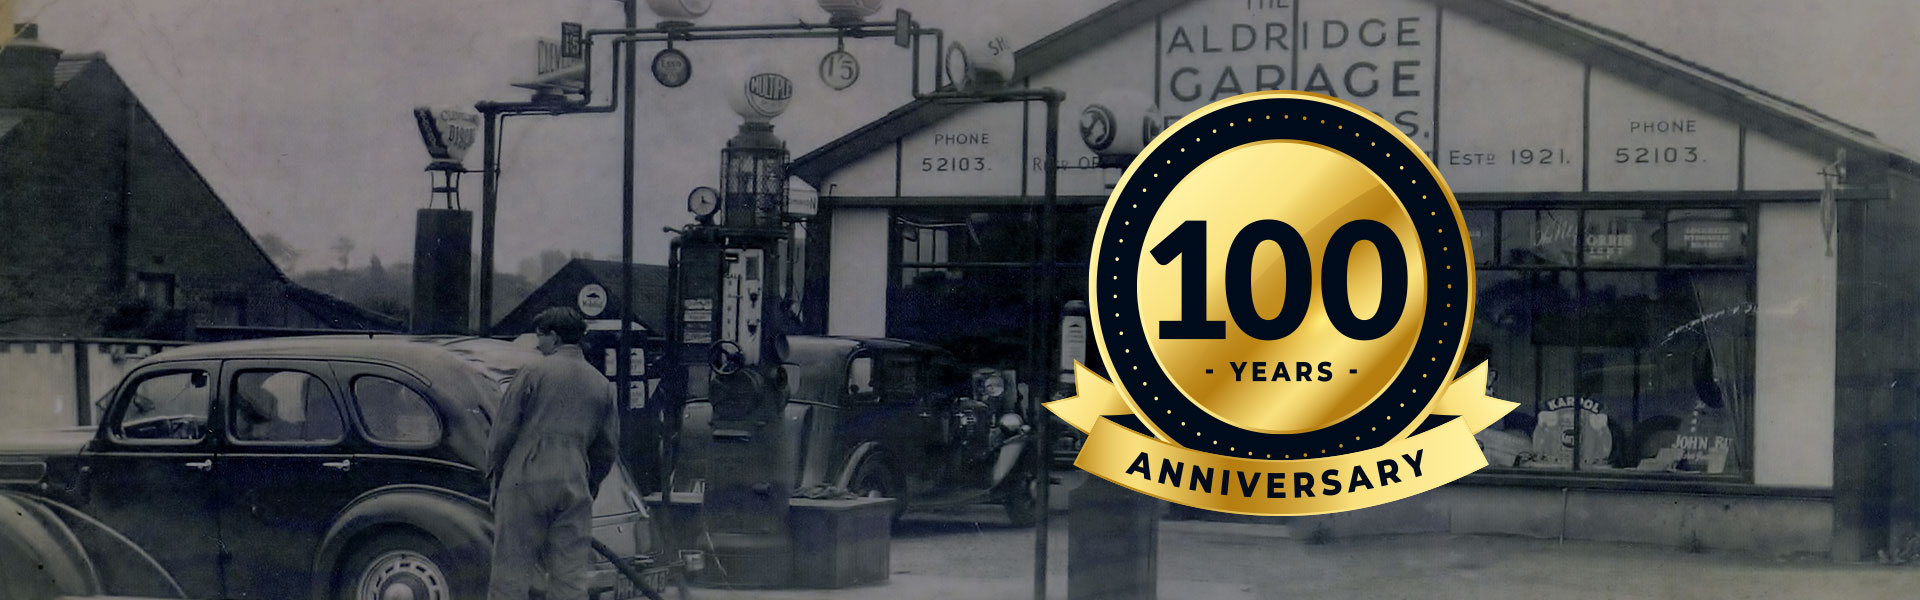 Celebrating 100 years in business